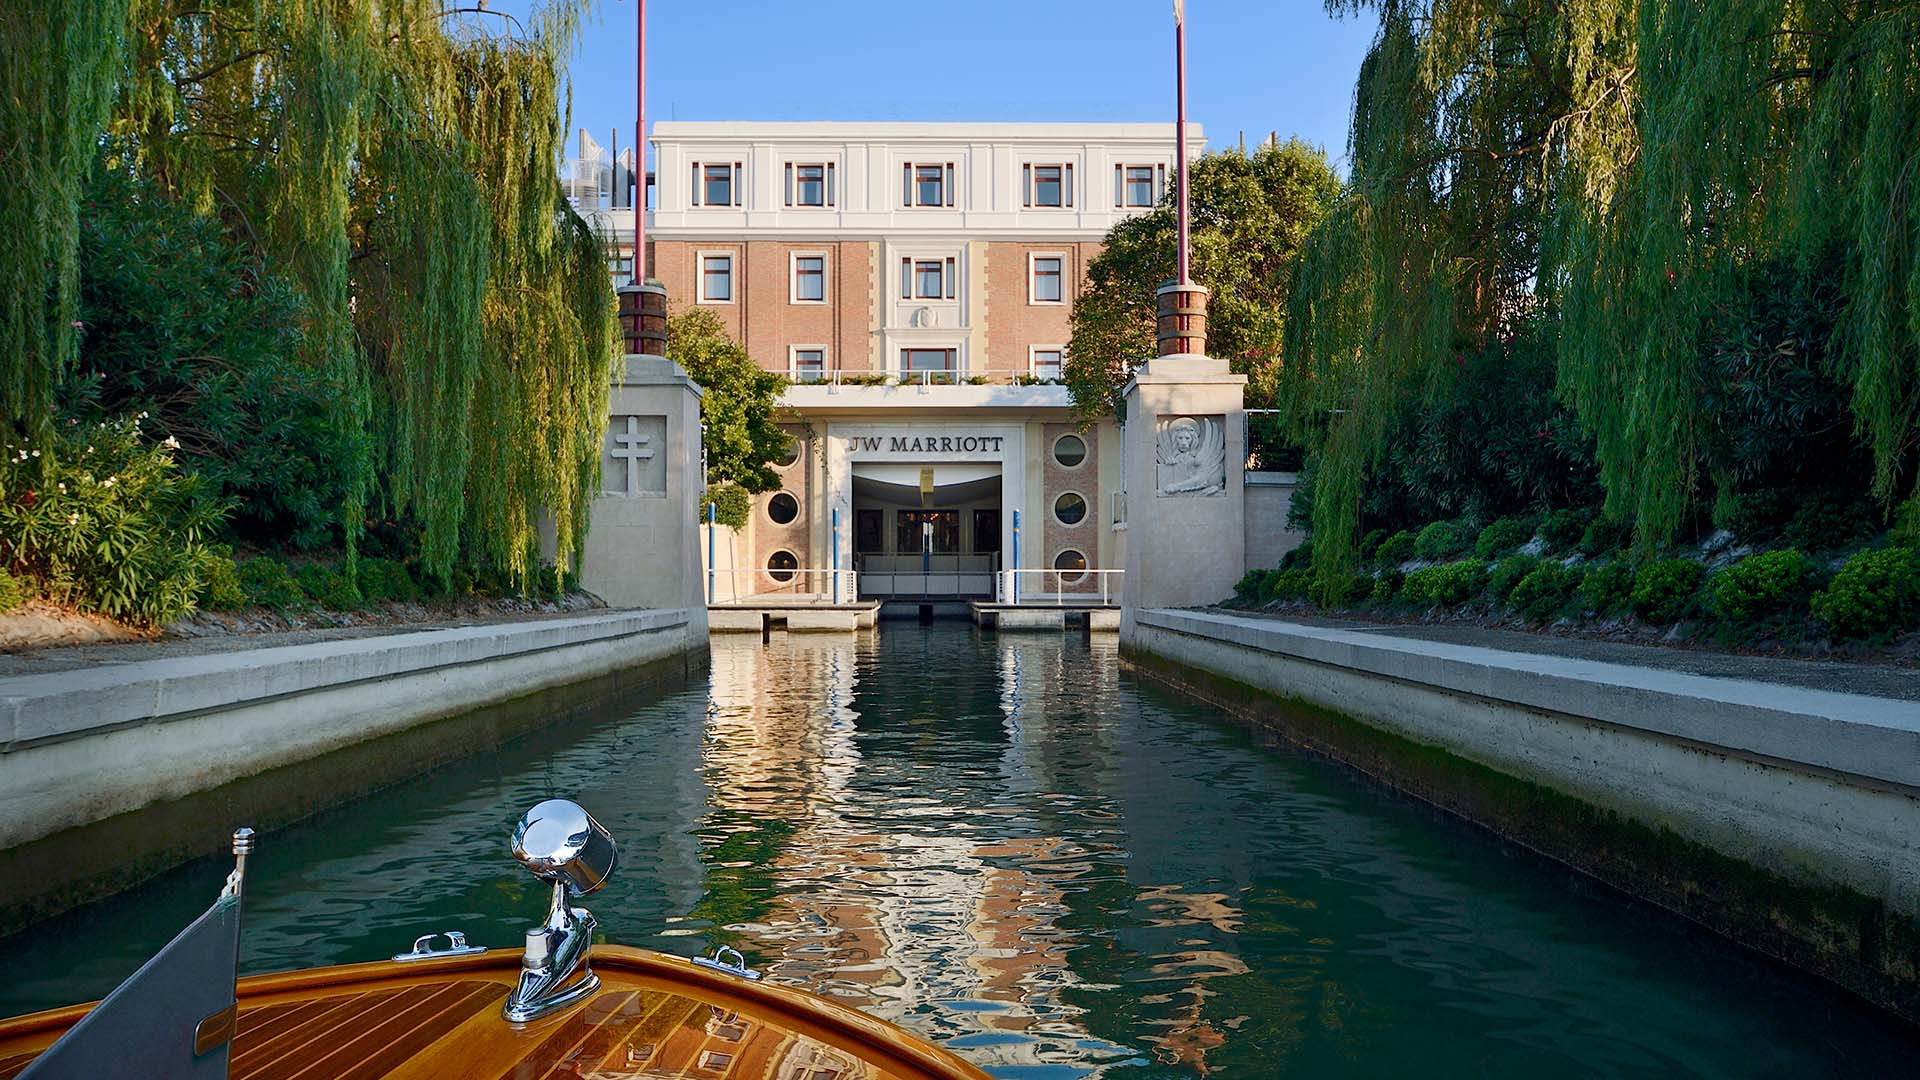 view of the JW Marriott Venice Resort & Spa waterway entrance, as seen from a boat